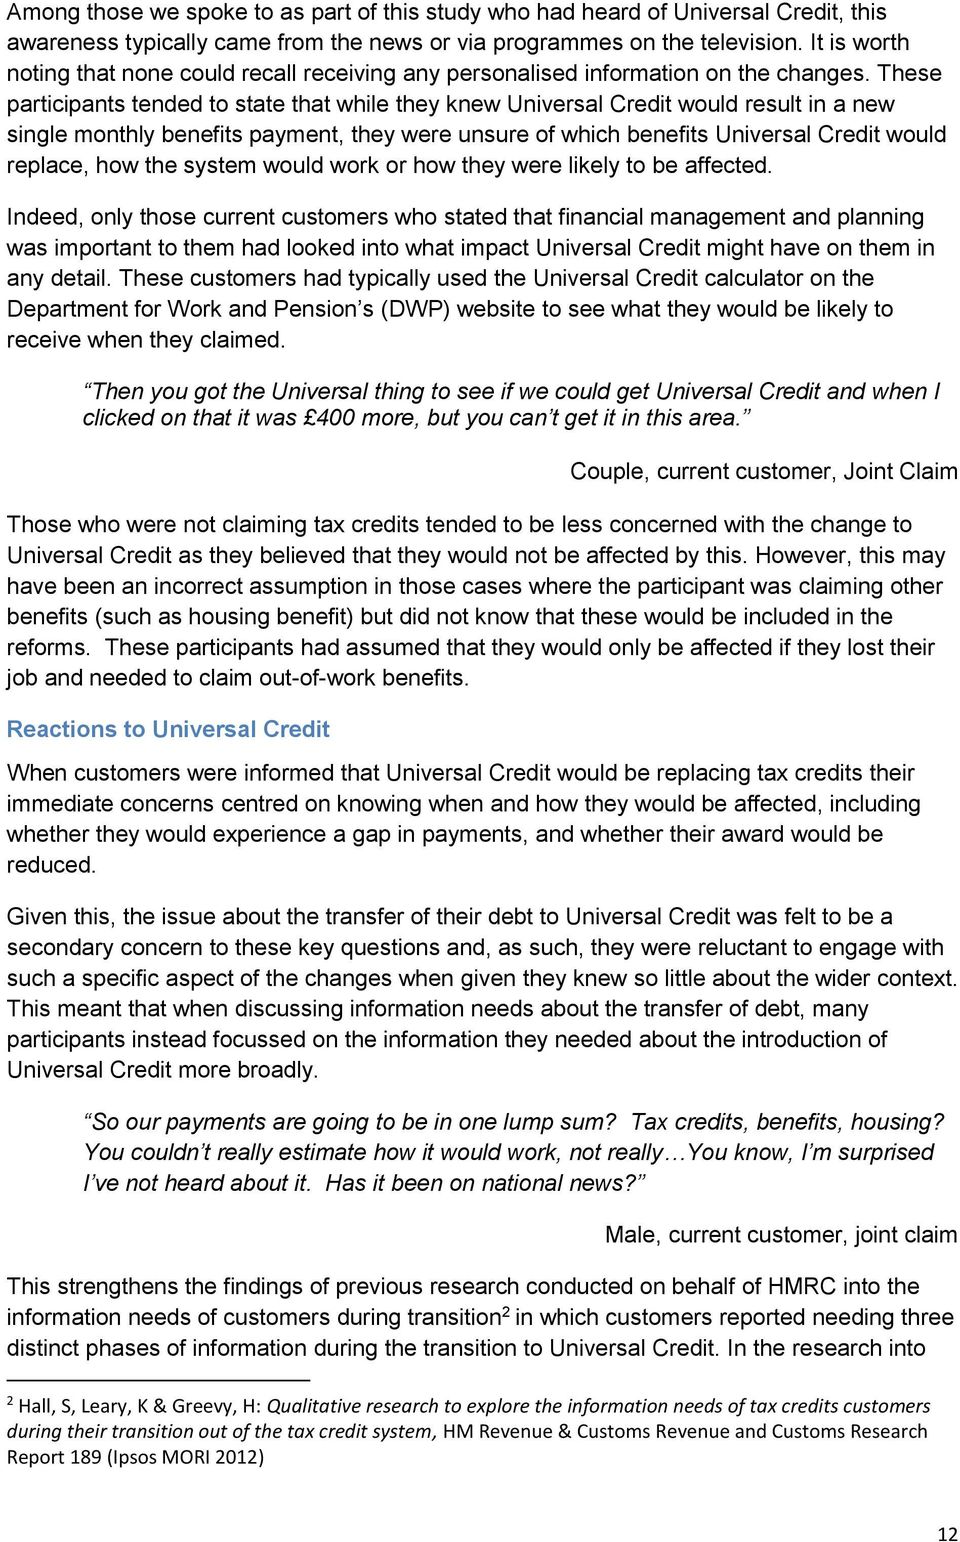 These participants tended to state that while they knew Universal Credit would result in a new single monthly benefits payment, they were unsure of which benefits Universal Credit would replace, how